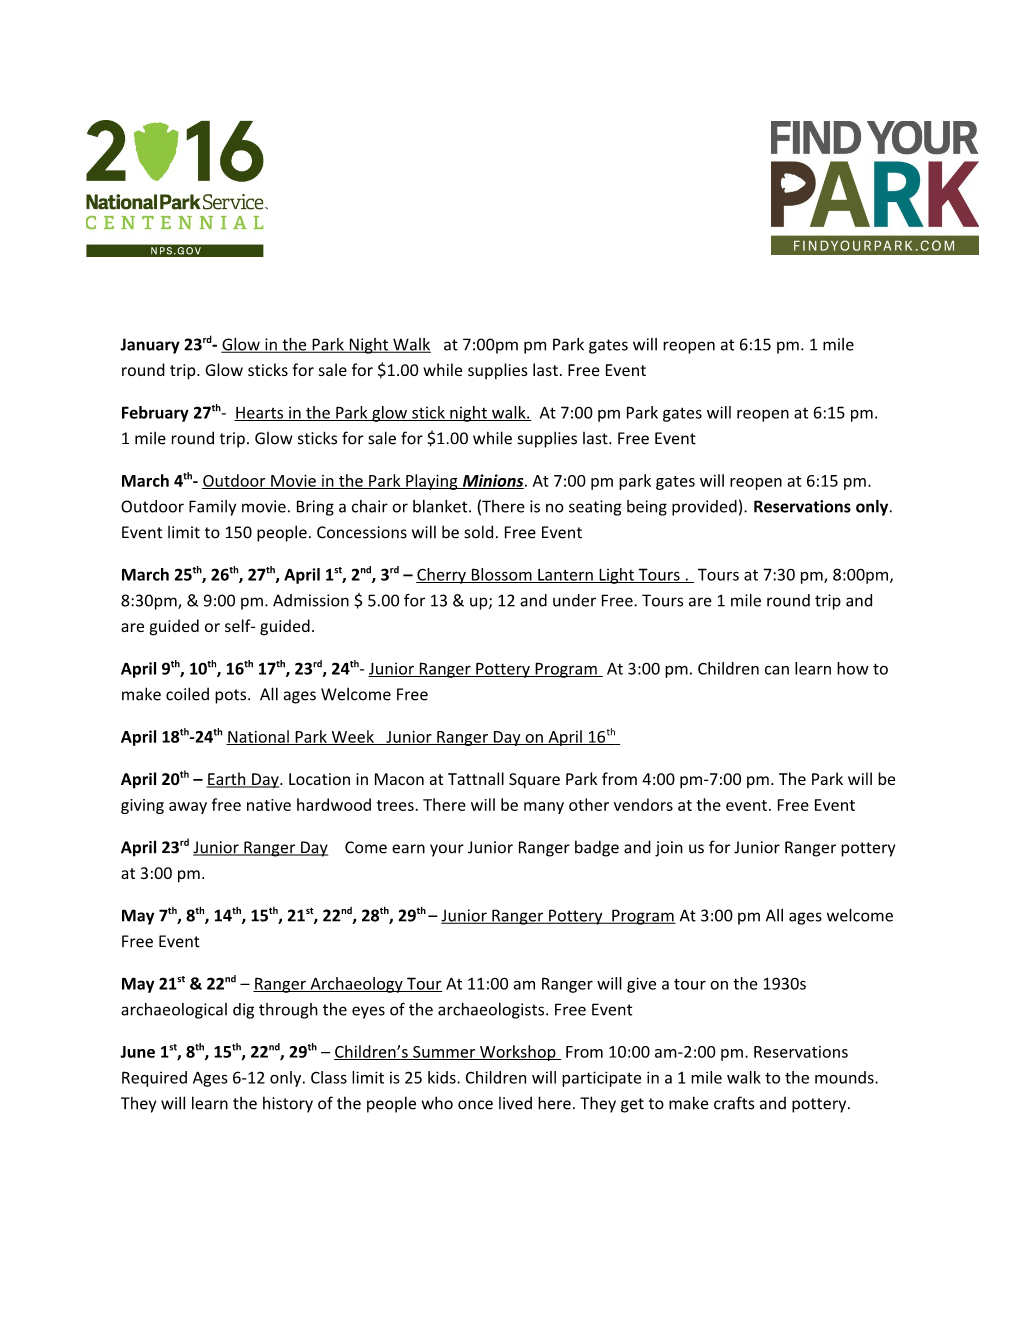 January 23Rd- Glow in the Park Night Walk at 7:00Pm Pm Park Gates Will Reopen at 6:15 Pm